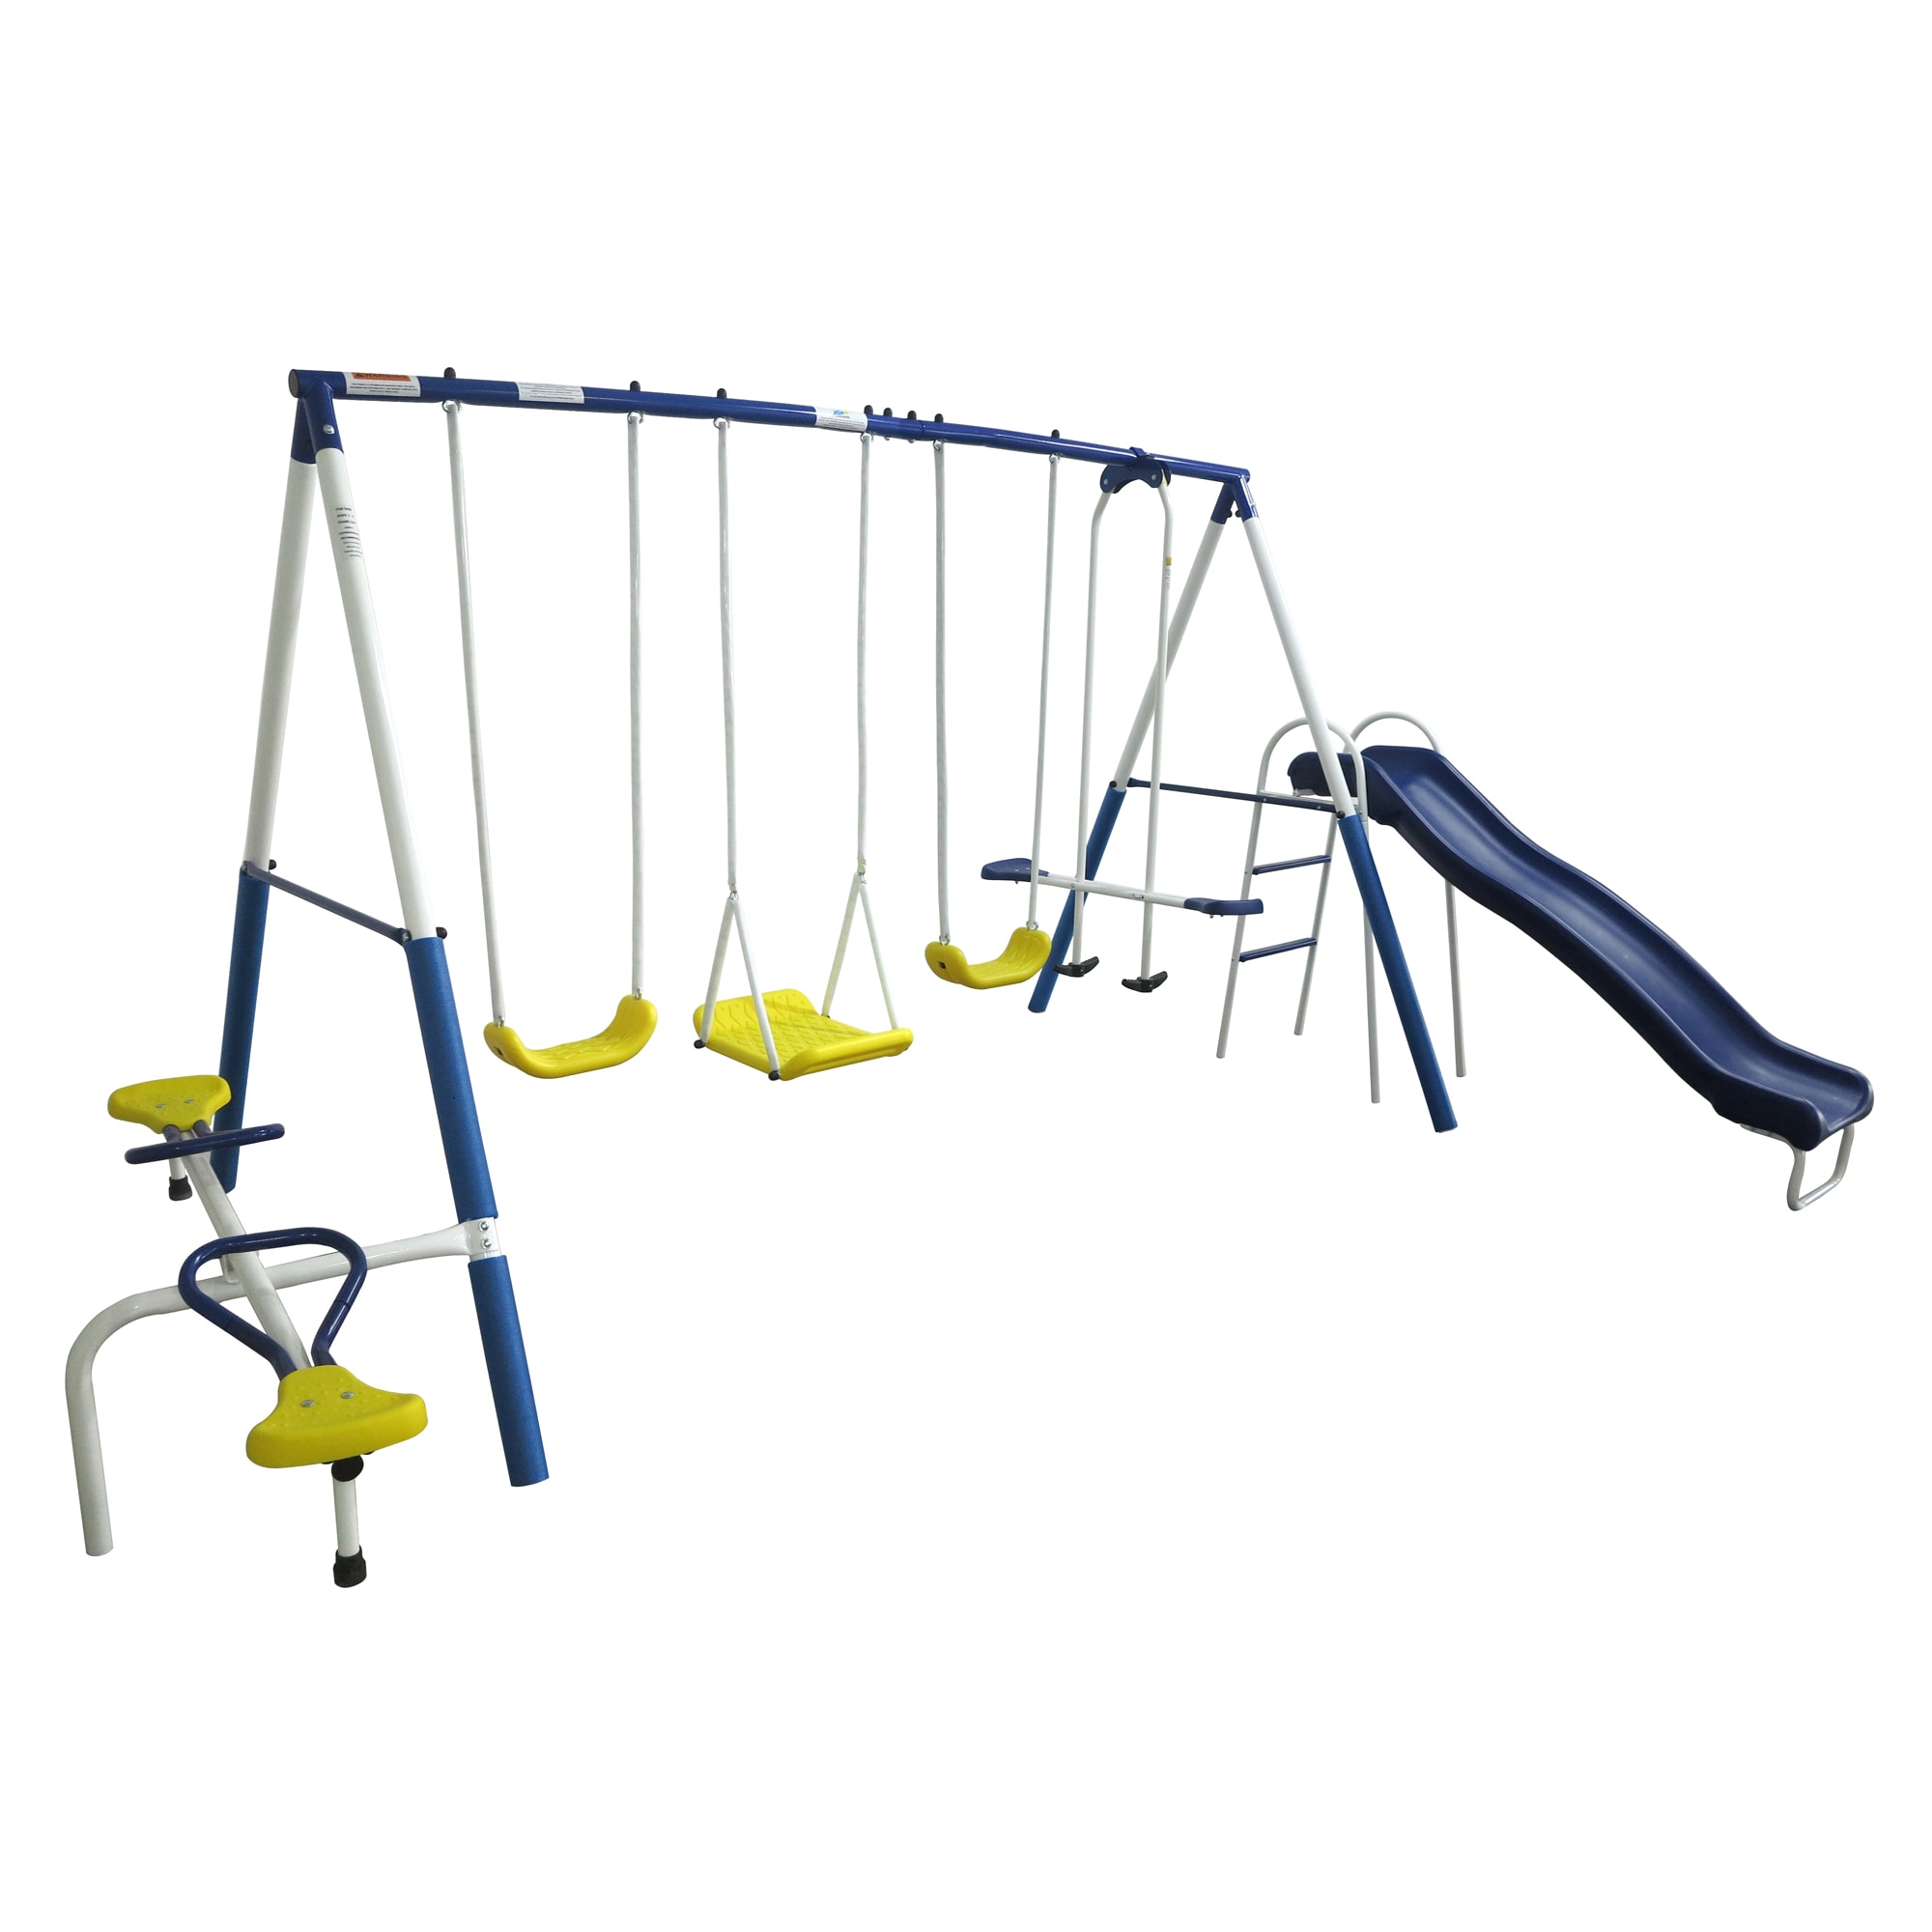 XDP Recreation Playground Galore Outdoor Backyard Kids Play Swing Set with Slide 